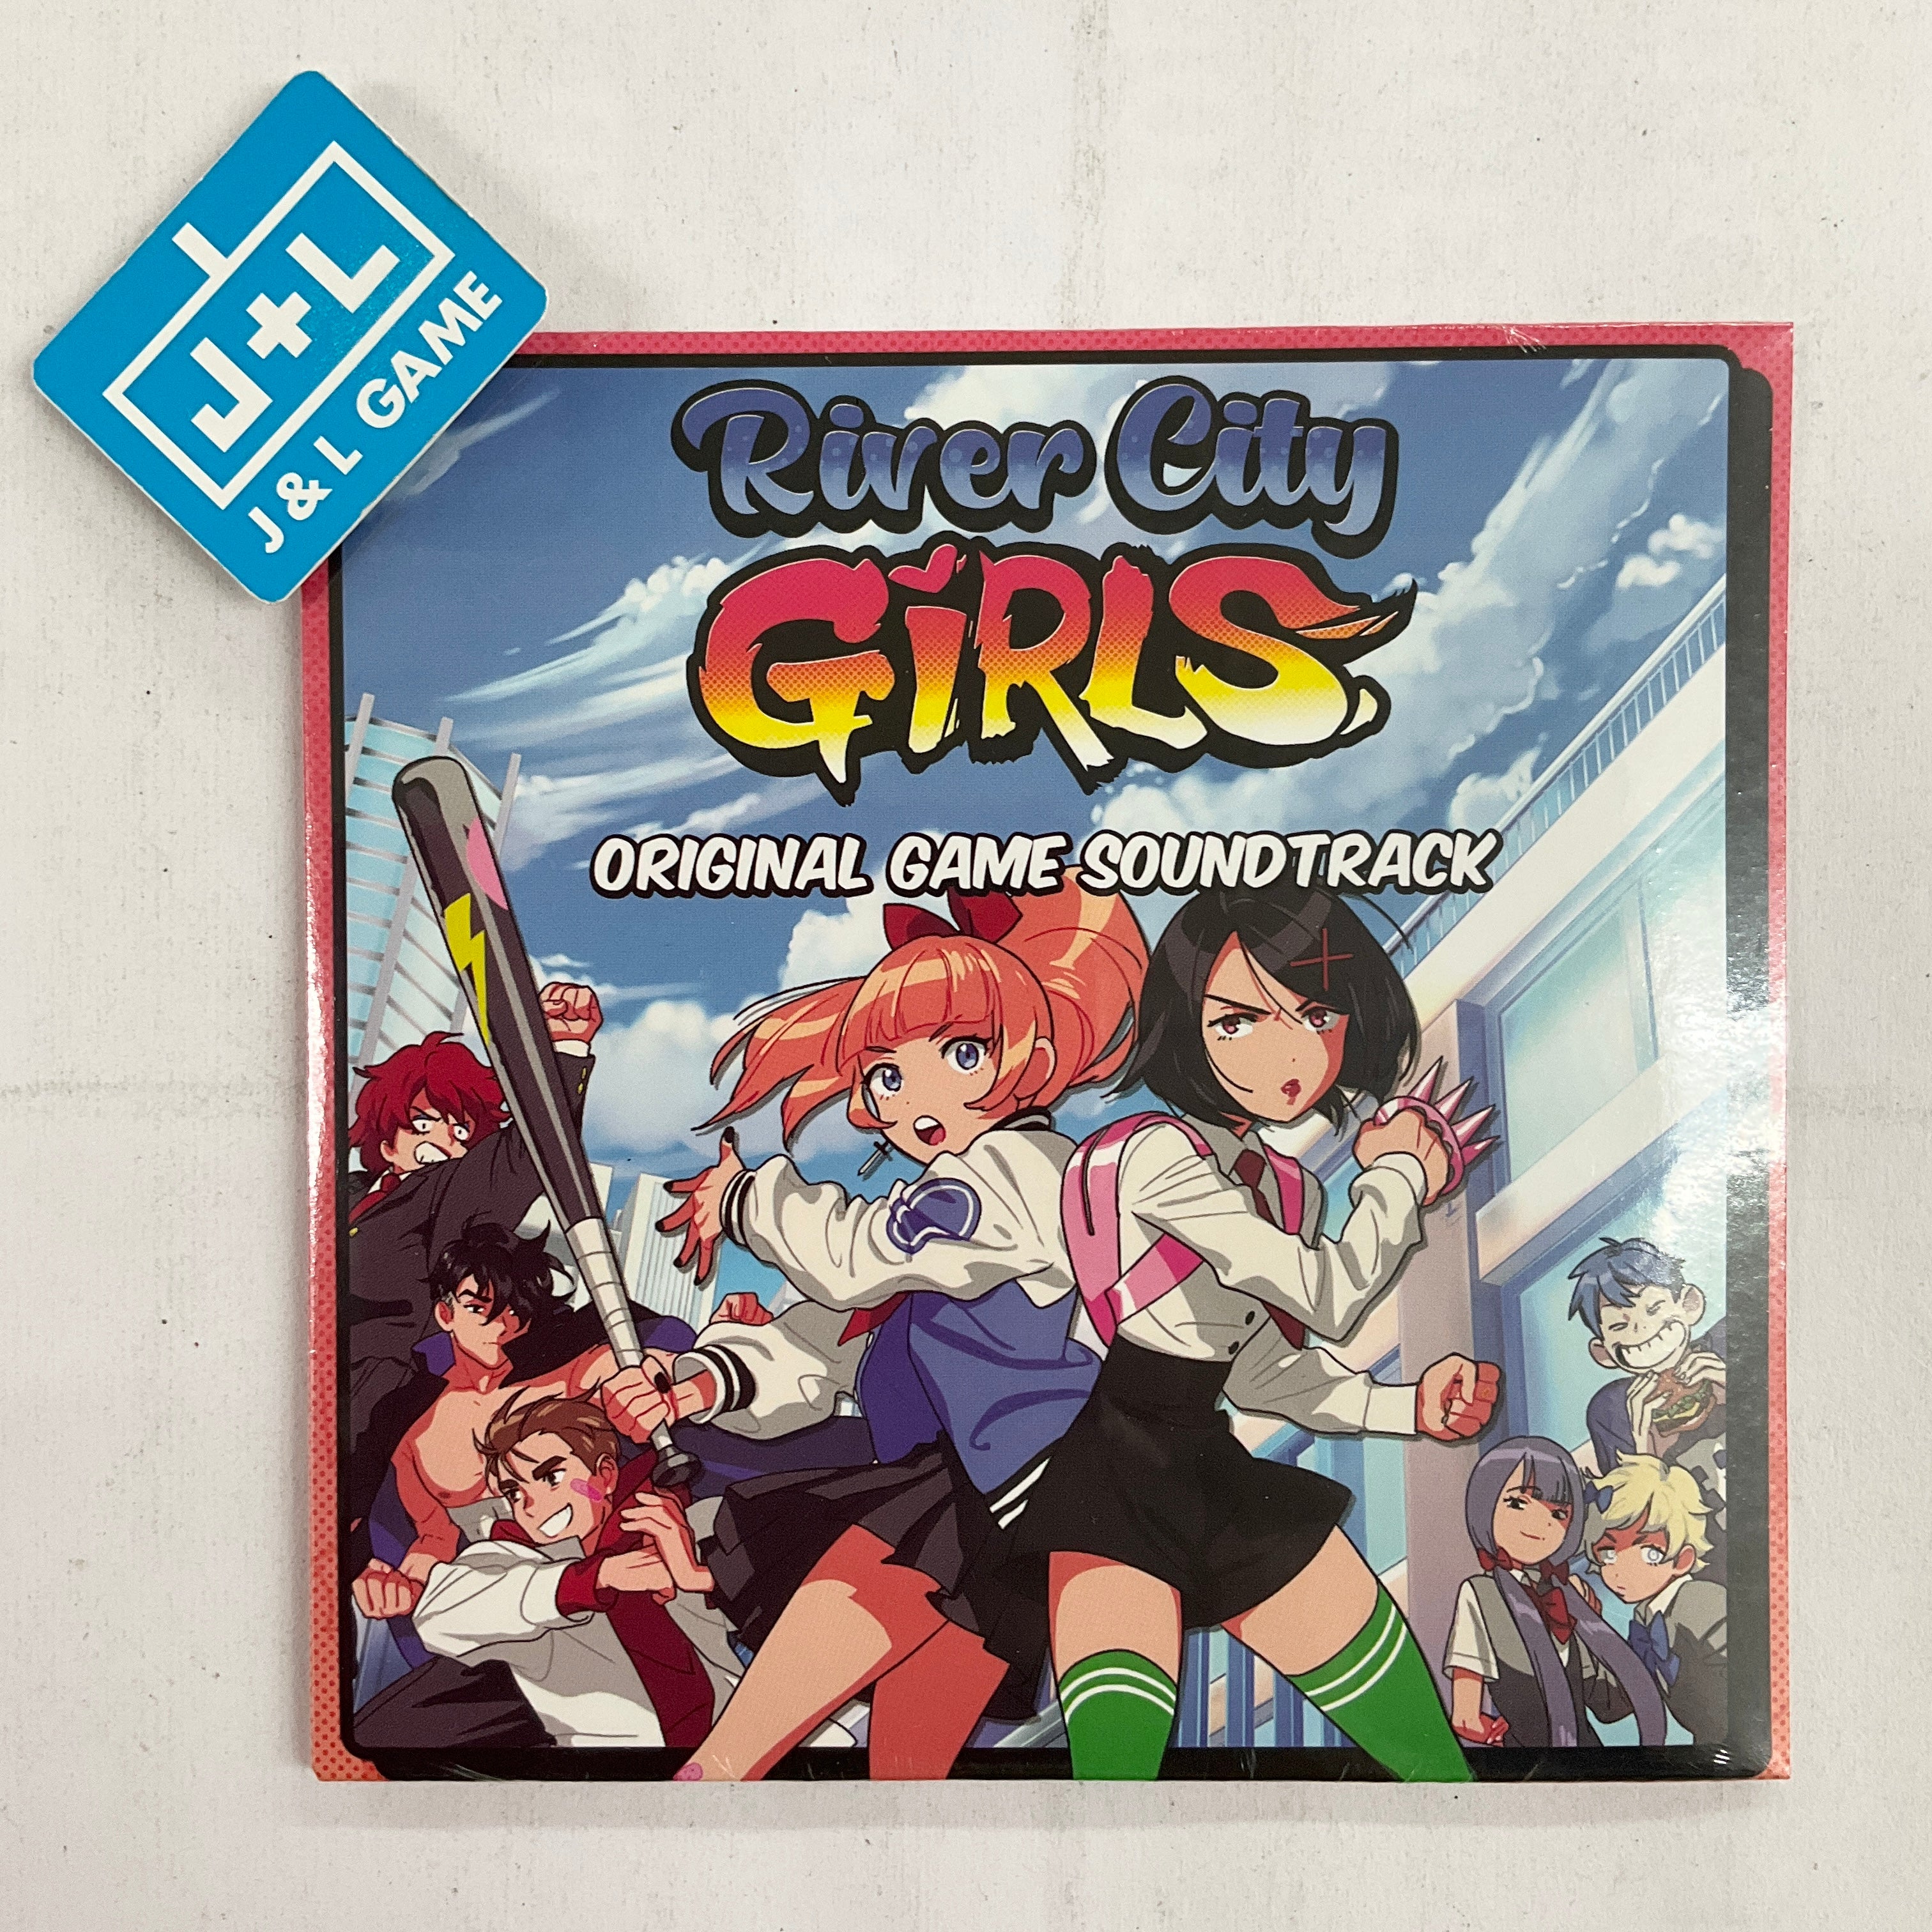 River City Girls (Limited Run #045 Limited Foil Cover Release with Music CD)- (NSW) Nintendo Switch Video Games Limited Run Games   